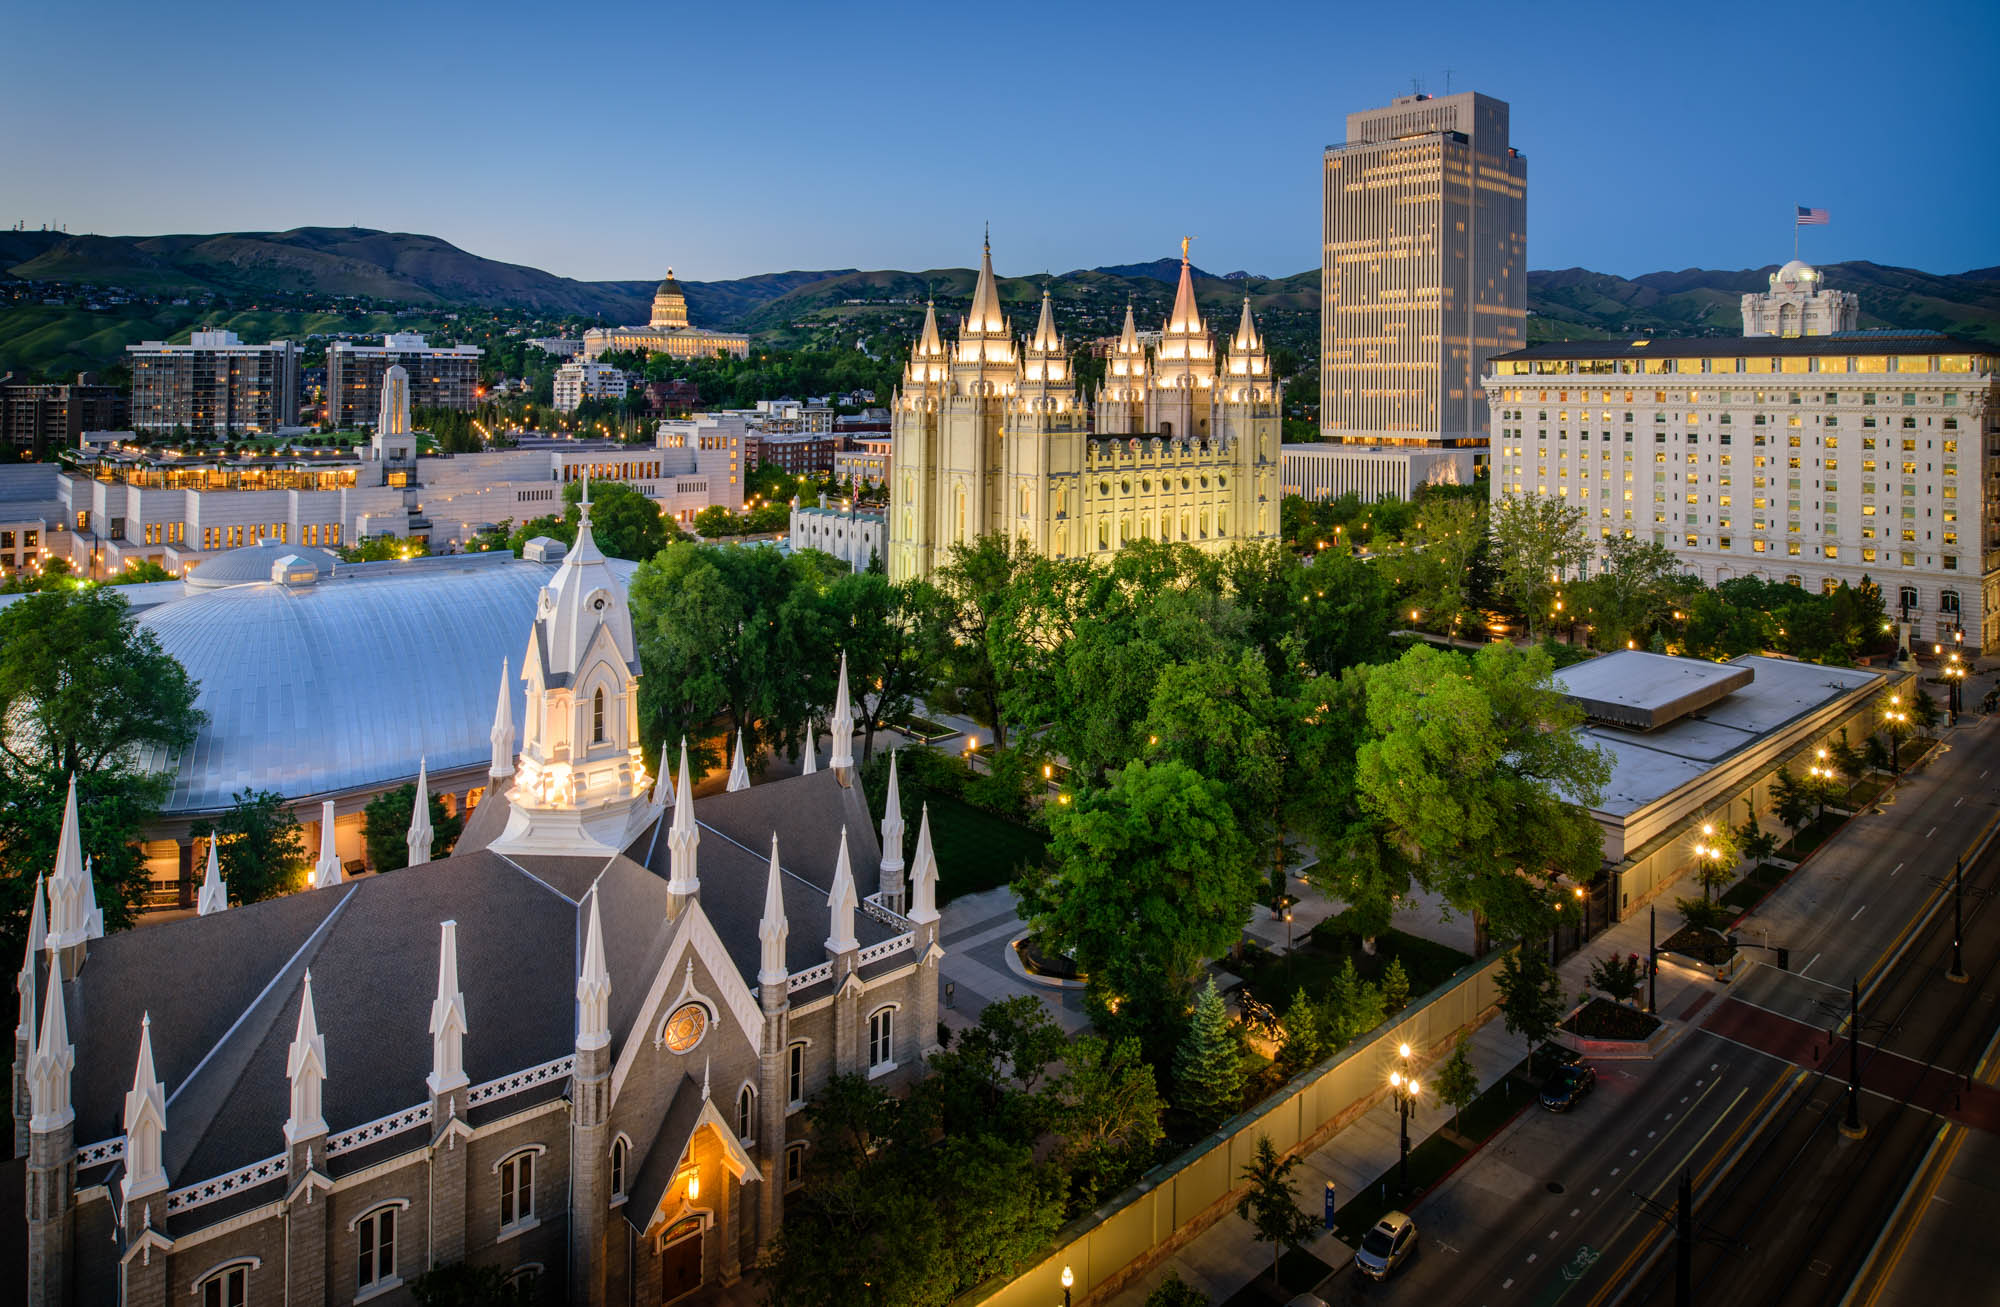 why did the mormons settle in utah and when did brigham young build a settlement in great salt lake city